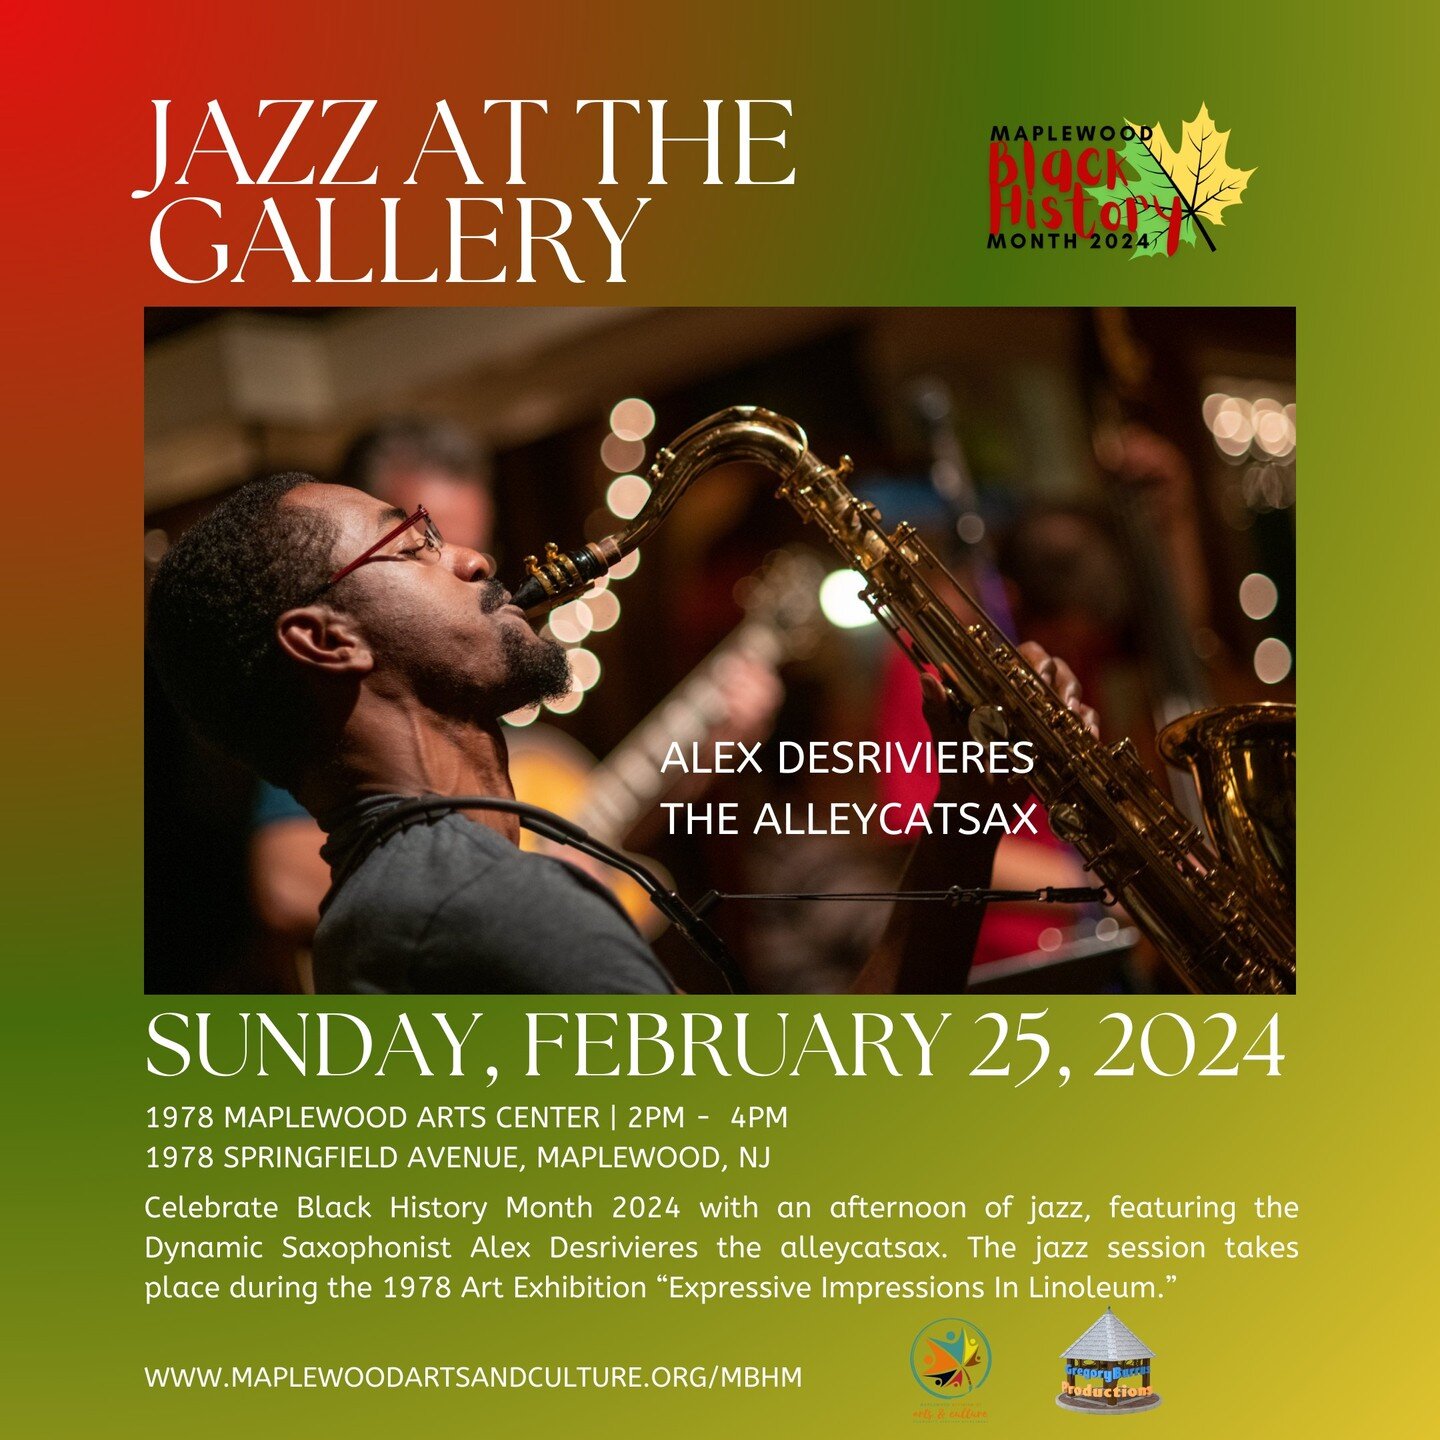 In Celebration of Black History Month, join us today at The Gallery for Jazz with Alex Desrivieres and to view the last day of the 1978 exhibit &quot;Expressive Impressions in Linoleum&quot; featuring artist Tenjin Ikeda.

1978 Arts Center
1978 Sprin